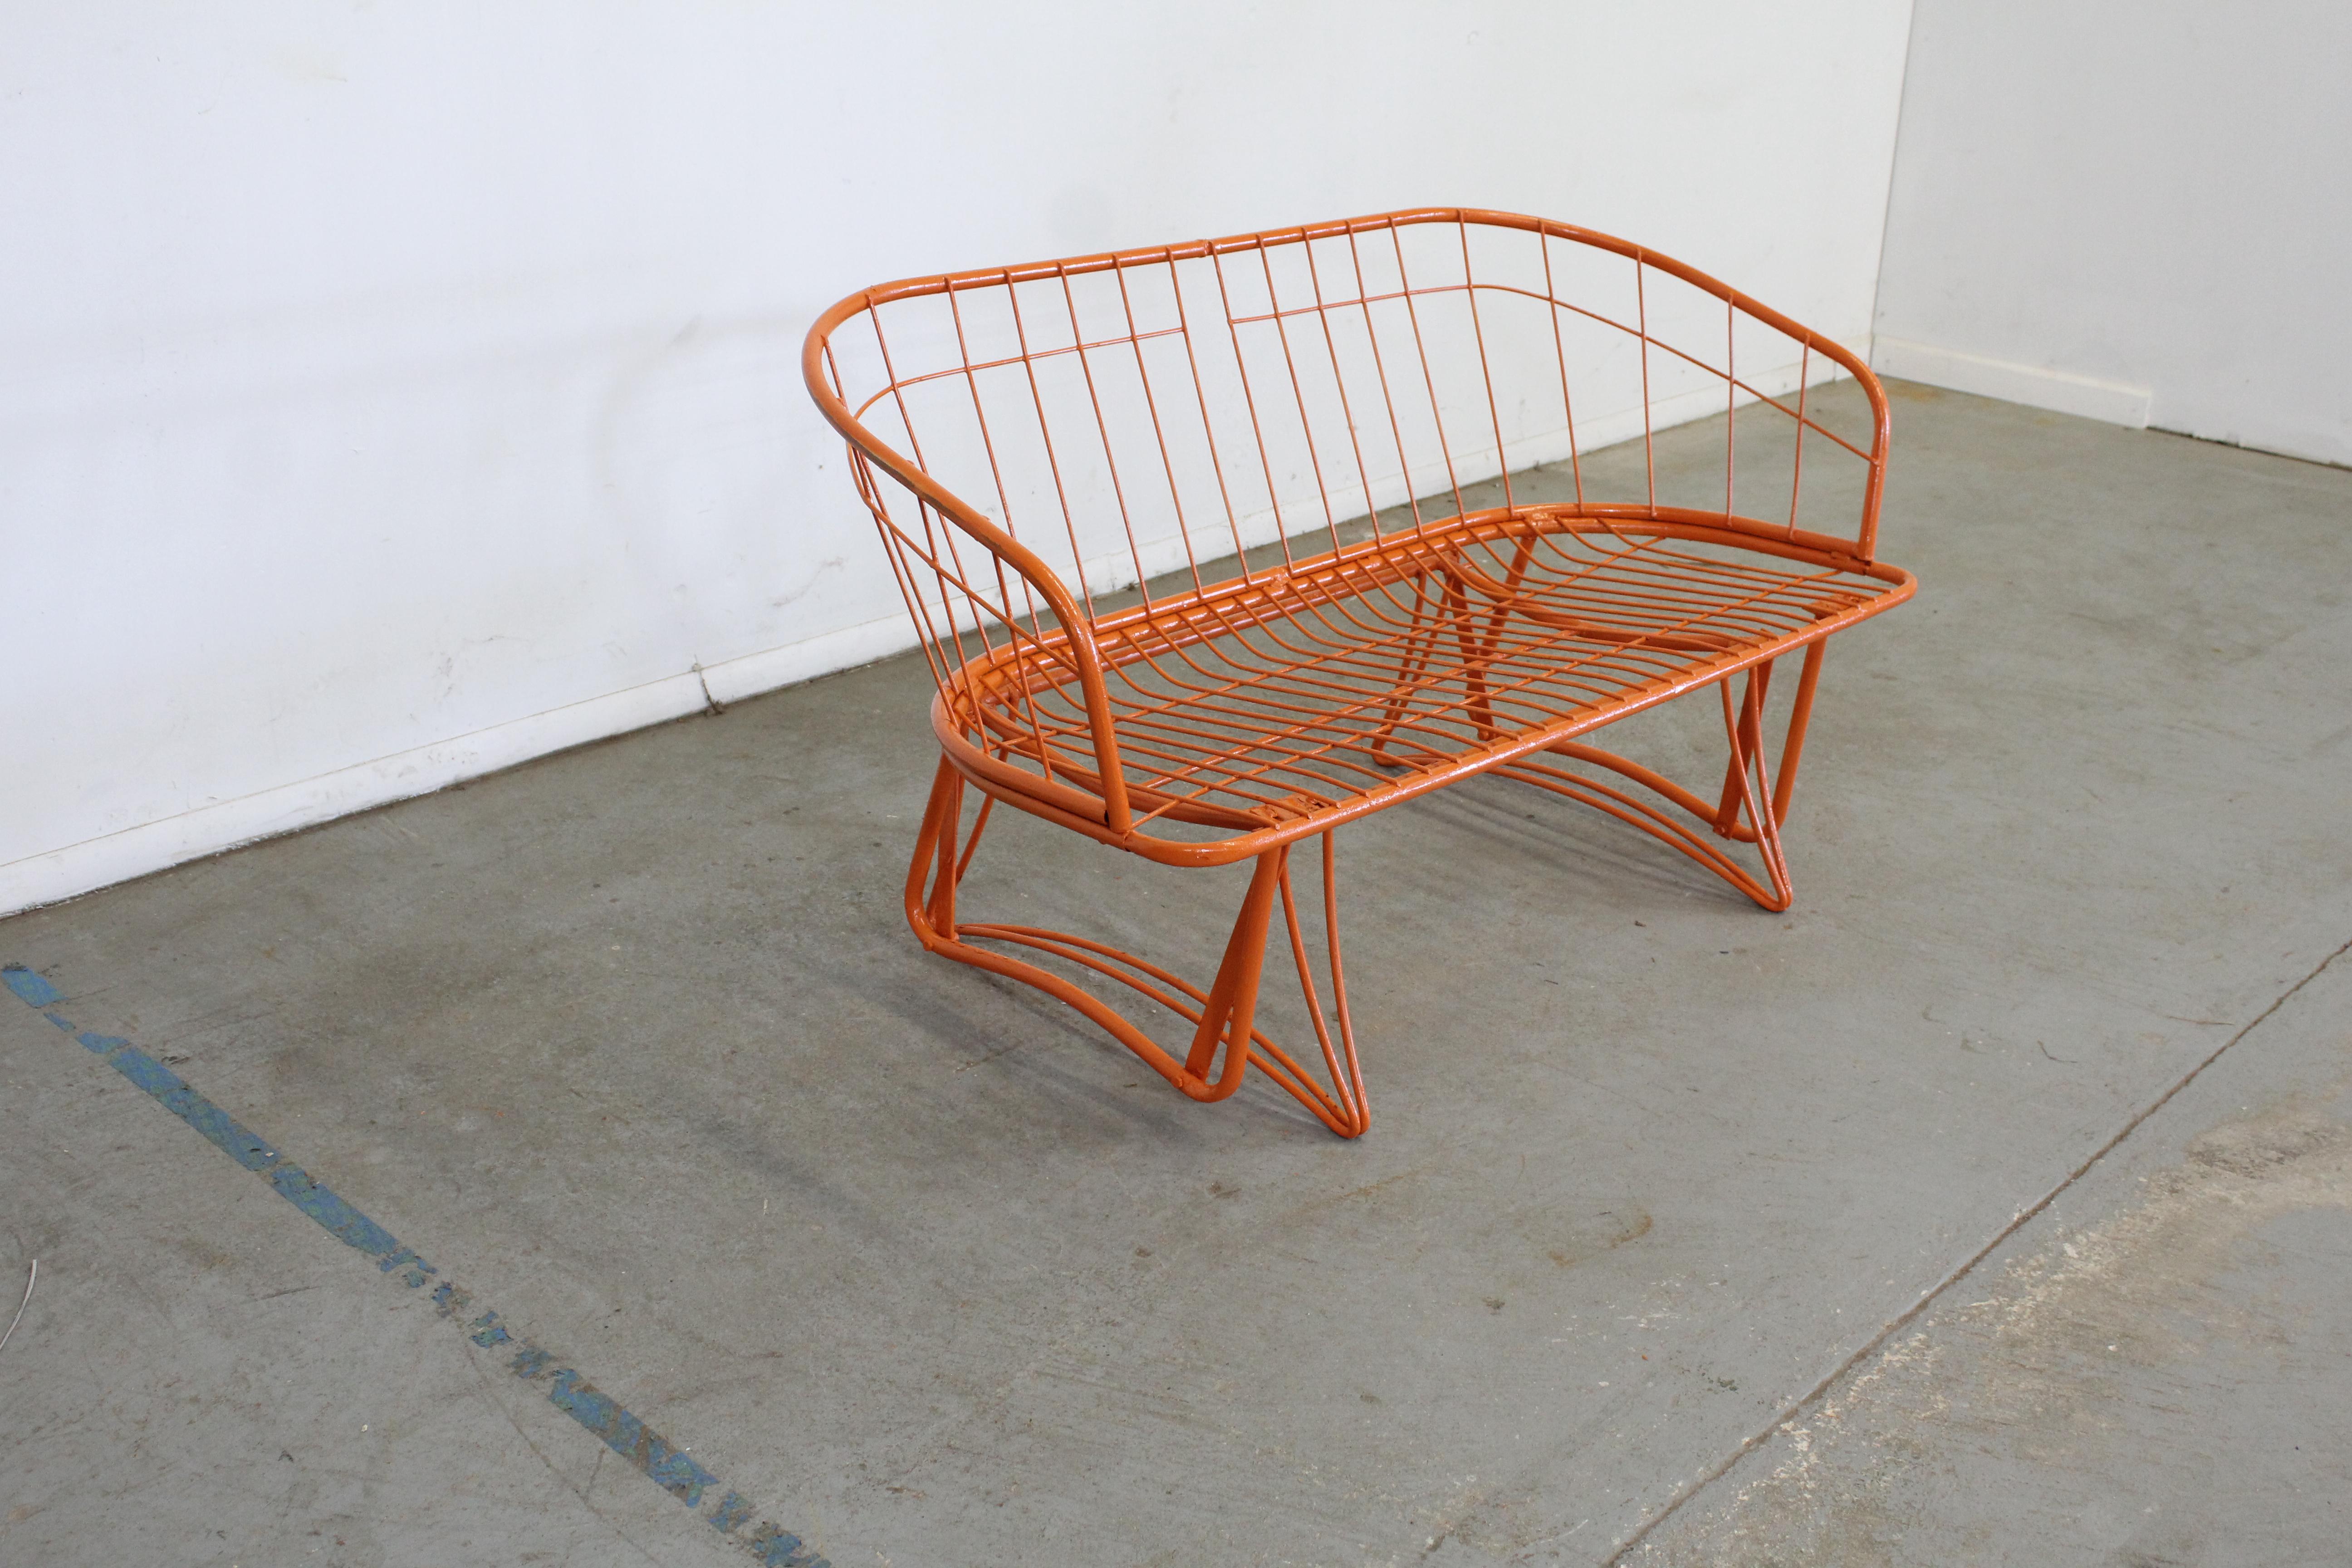 Mid-Century Modern atomic orange Homecrest outdoor metal curved back glider bench
Offered is a Mid-Century Modern atomic orange Homecrest outdoor metal curved back glider bench, circa 1960's. This bench has been repainted in an atomic orange. It is